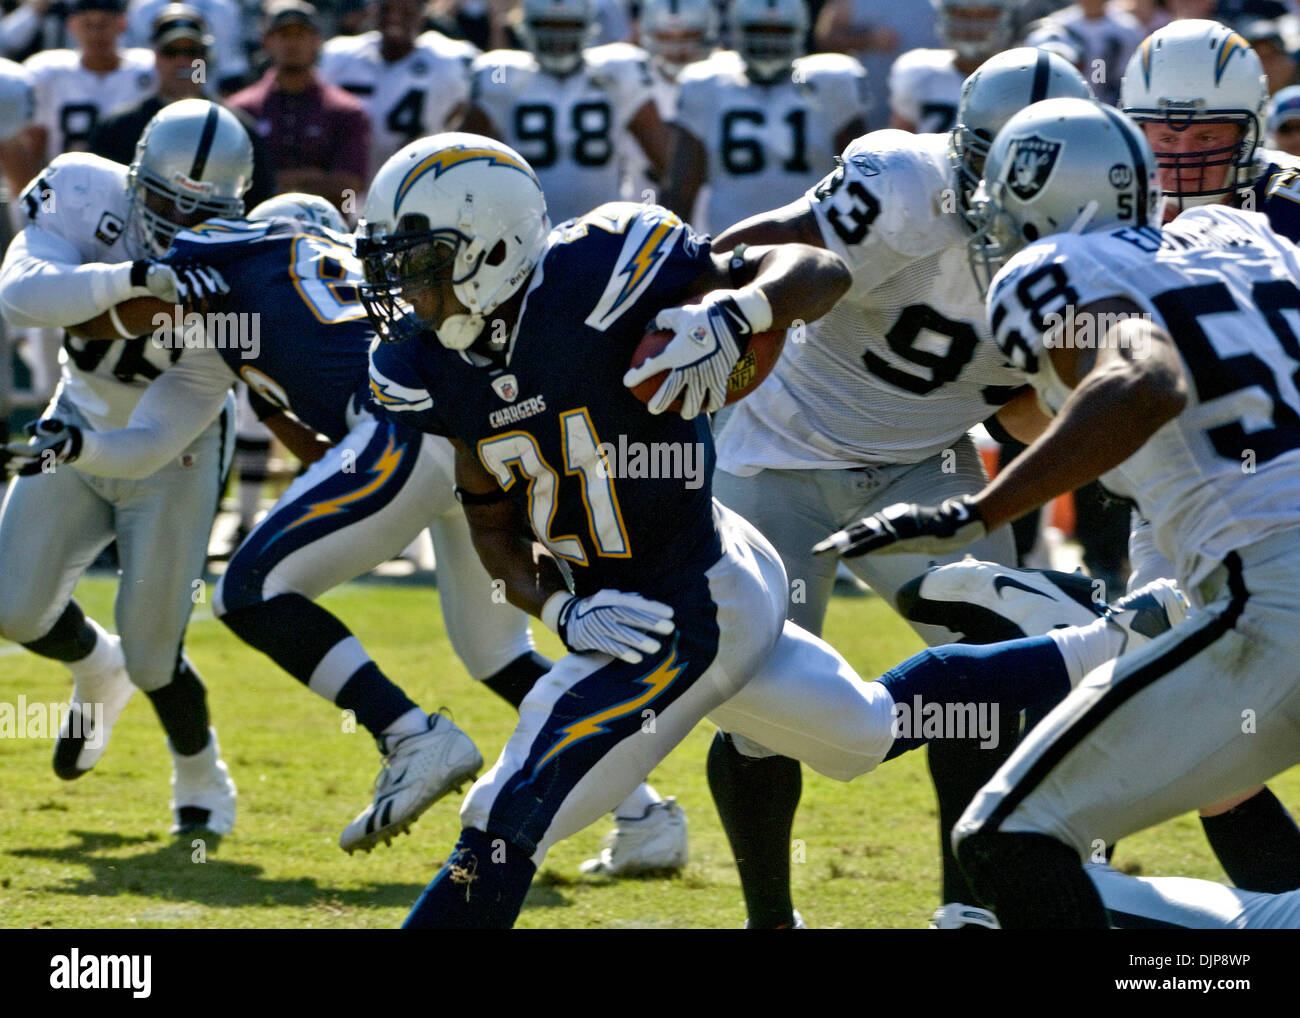 Sep 28, 2008 - OAKLAND, CA, USA - San Diego Chargers running back LADAINIAN TOMLINSON #21 runs between Oakland Raiders defensive tackle TOMMY KELLY #93 and defensive end KALIMBA EDWARDS #58 during a game at McAfee Coliseum. (Credit Image: © AL GOLUB/Golub Photography/Golub Photography) Stock Photo